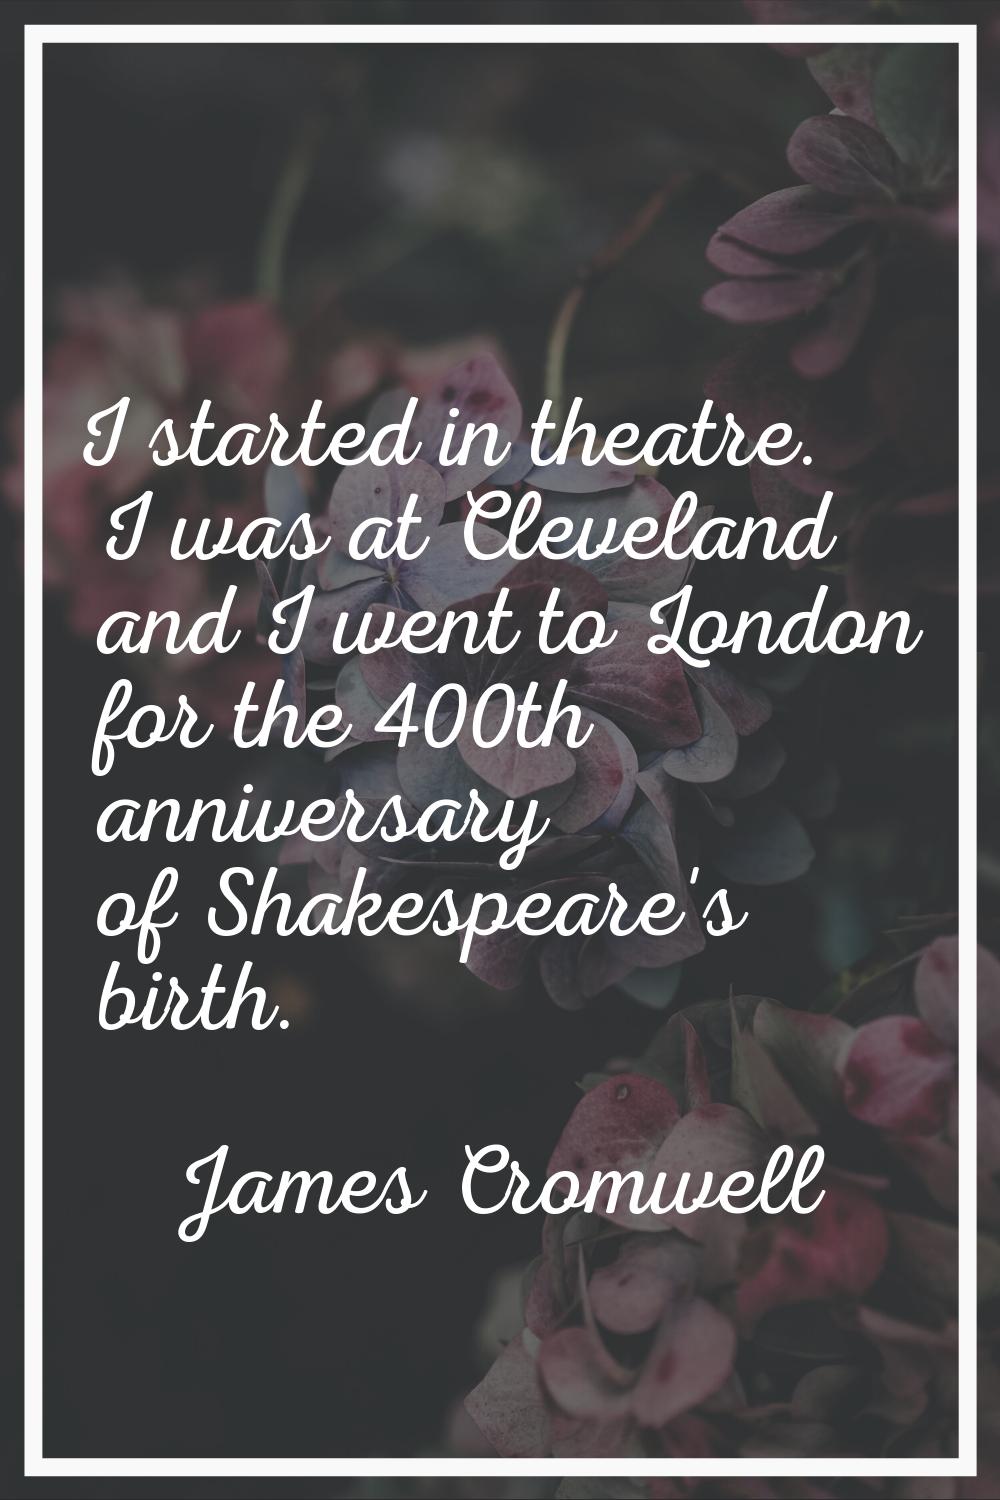 I started in theatre. I was at Cleveland and I went to London for the 400th anniversary of Shakespe